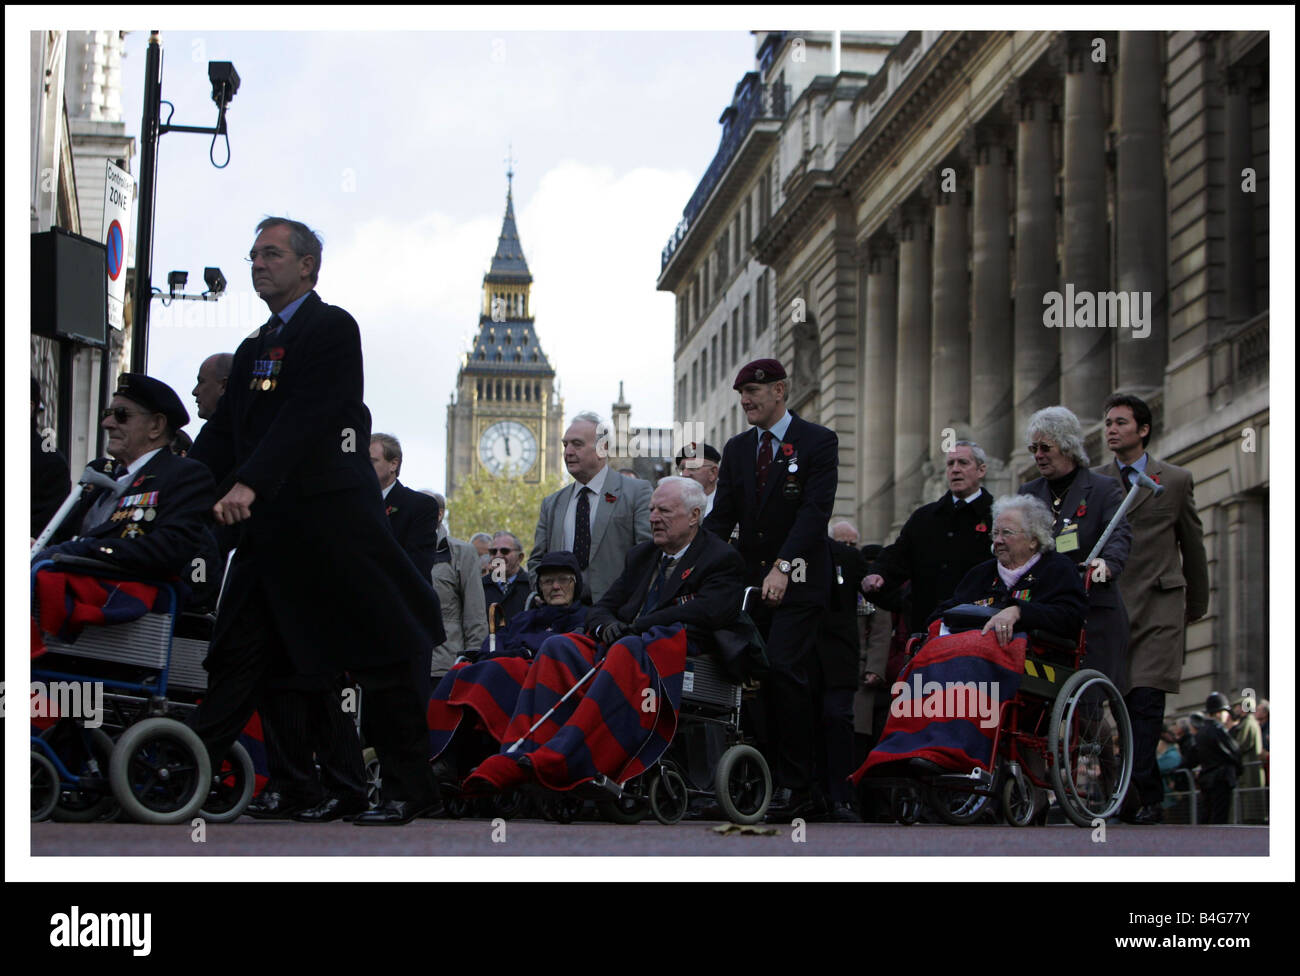 The Queen leads the nation in remembrance along with other members of the royal family leading politicians and veterans during the Remembrance Sunday Service The Cenotaph Whithall Our Picture Shows Disabled veterans prepare to parade pass The Cenotaph in an act of remembrance November 2005 Stock Photo